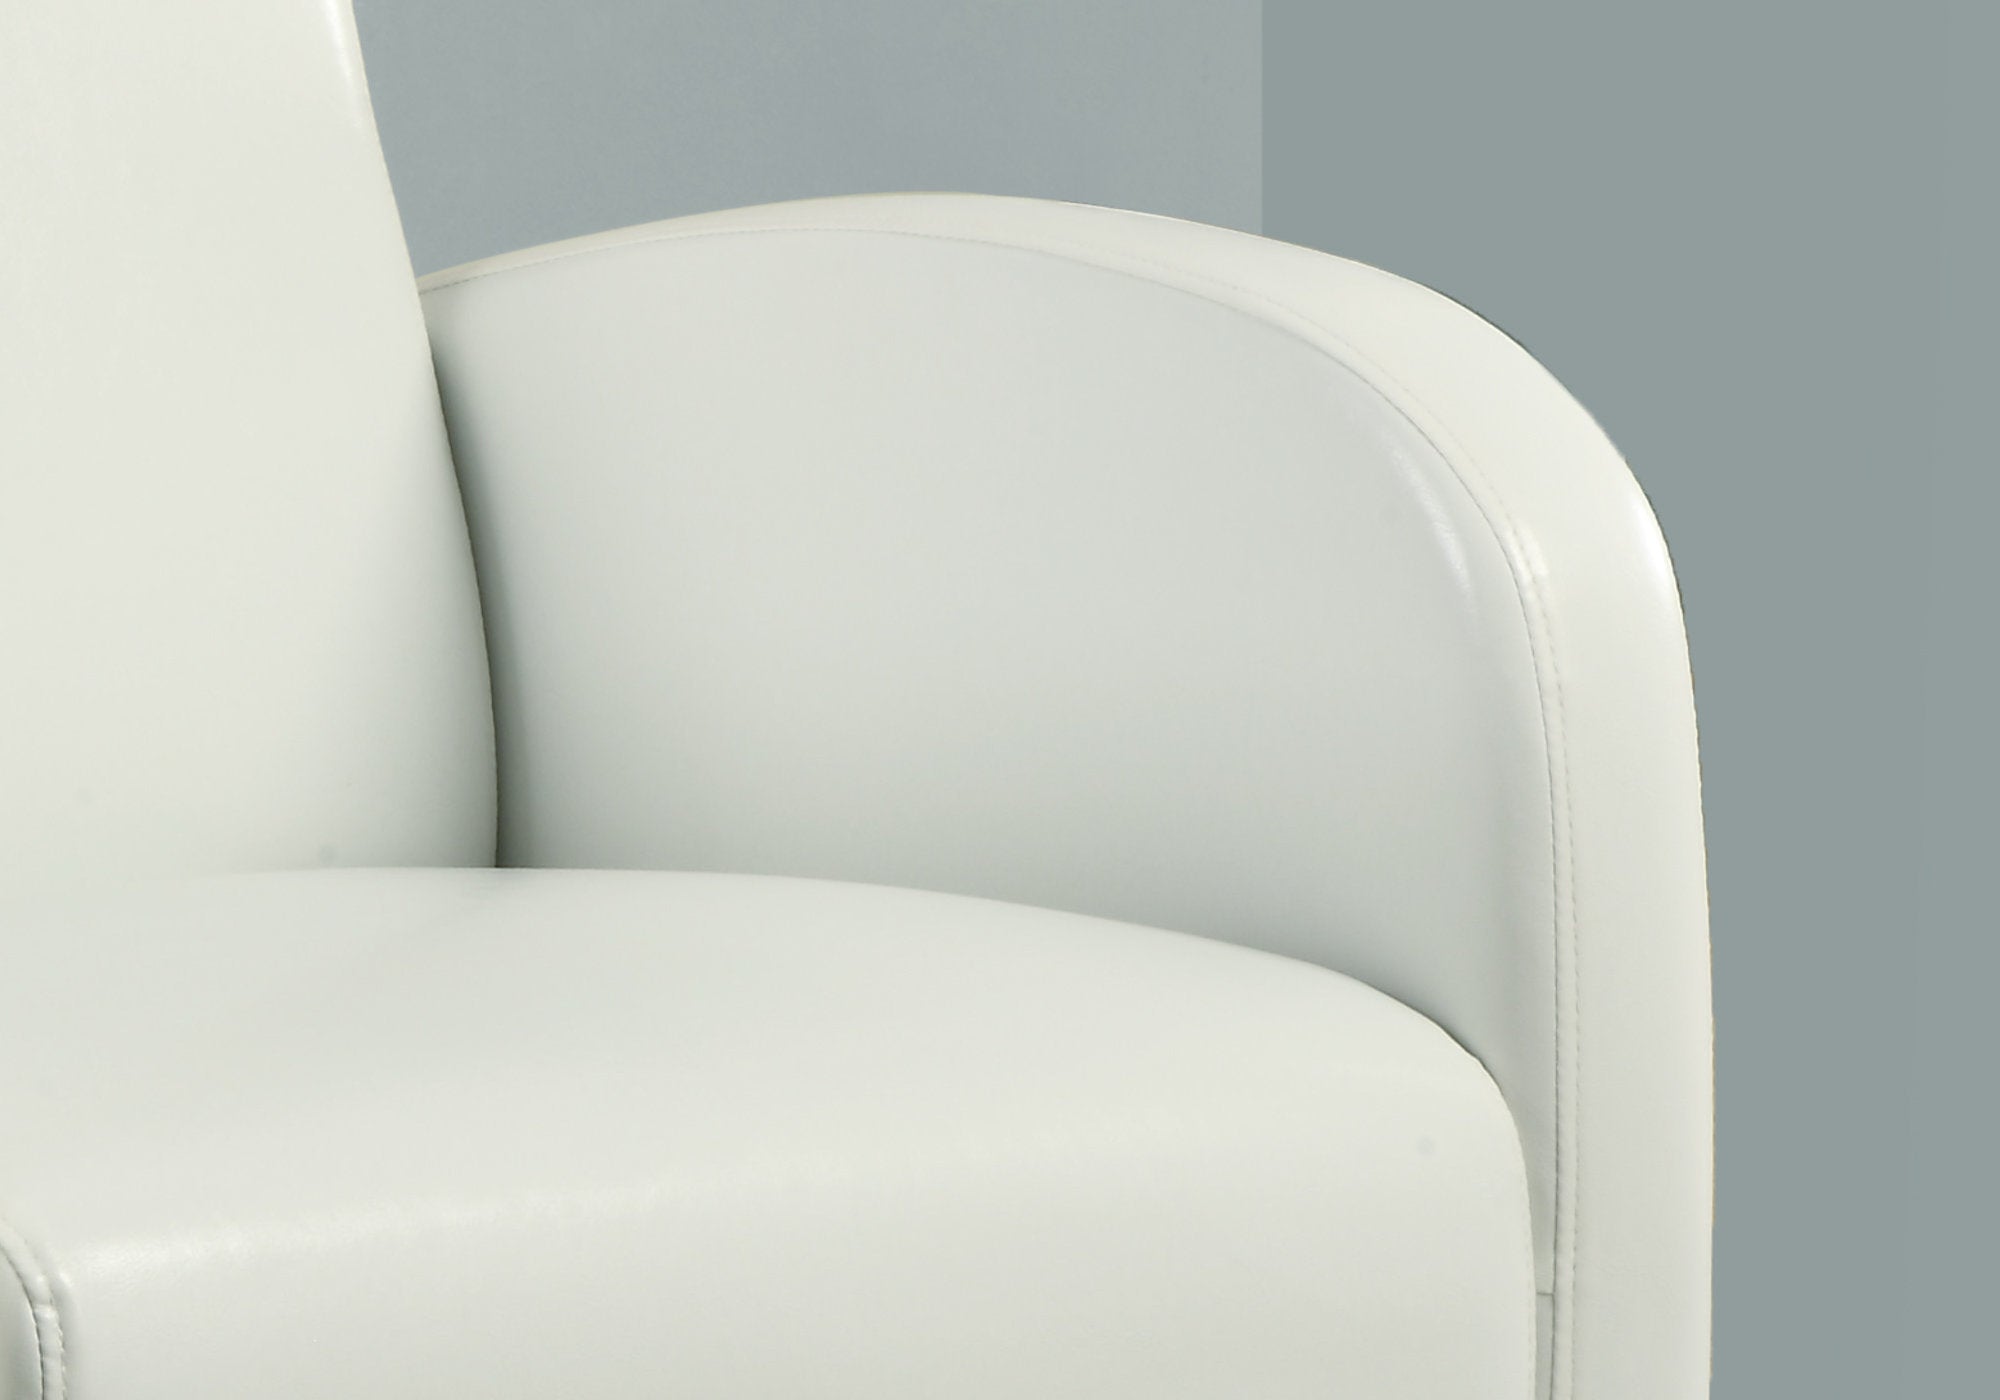 Accent Chair - White Leather-Look Fabric